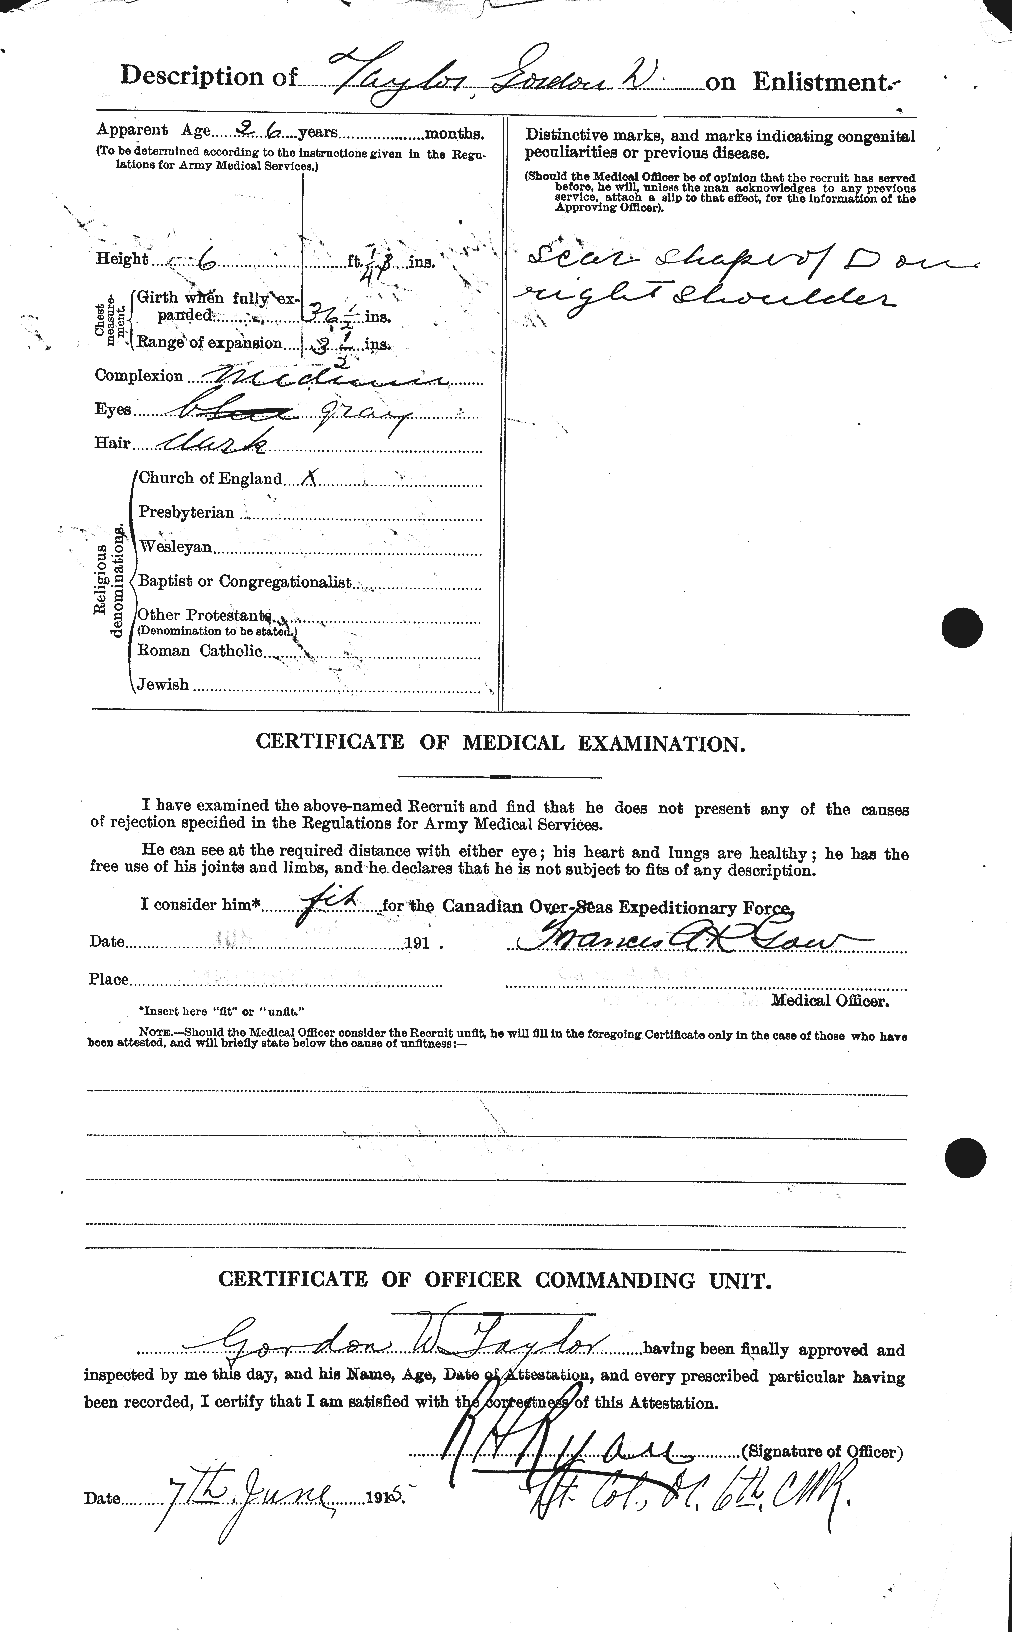 Personnel Records of the First World War - CEF 626392b